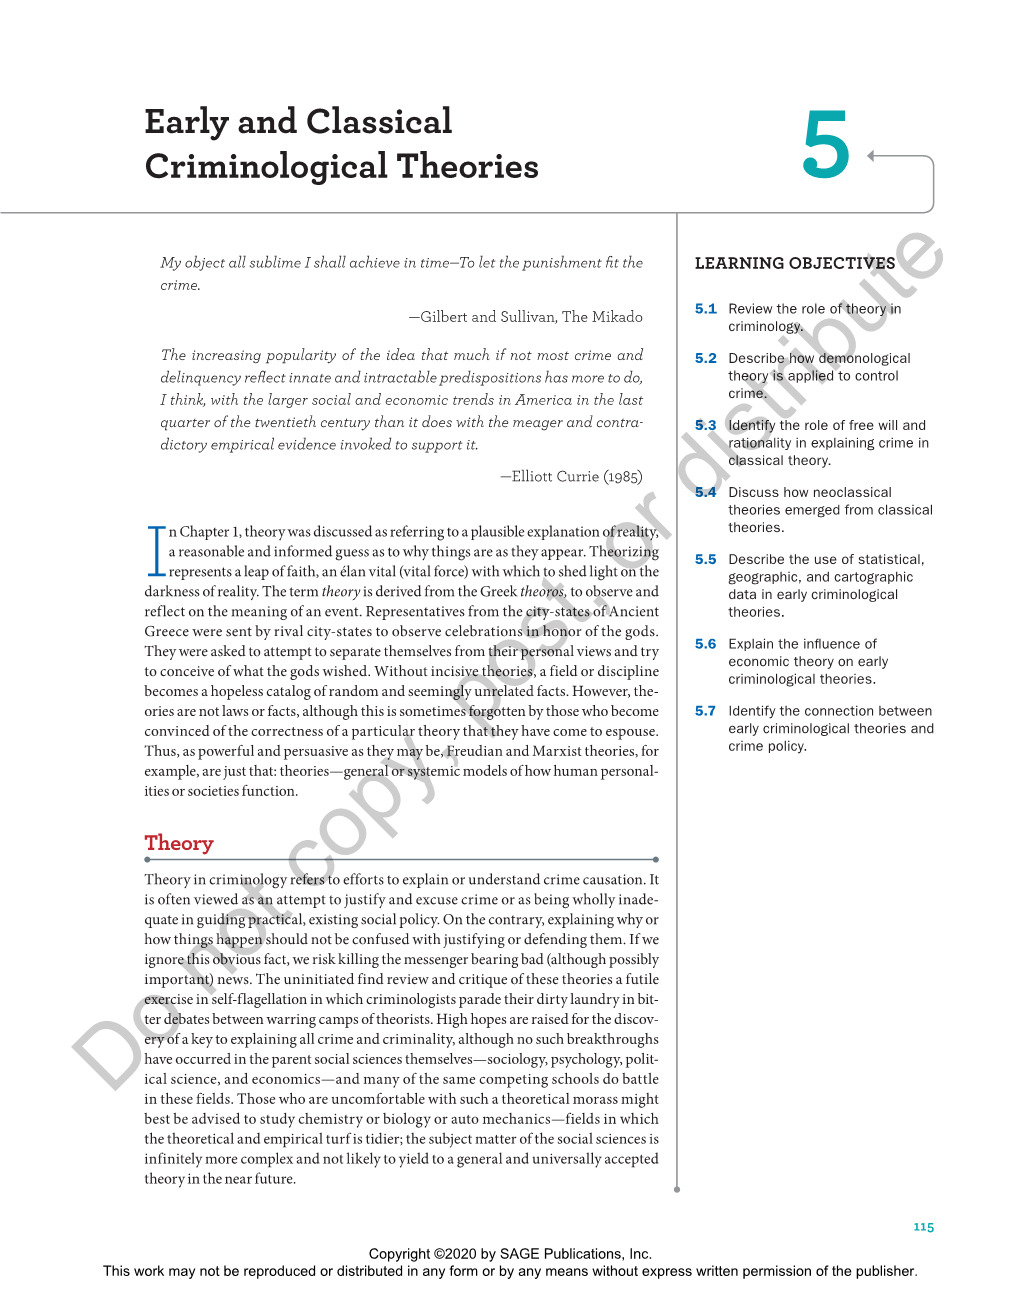 Early and Classical Criminological Theories 5